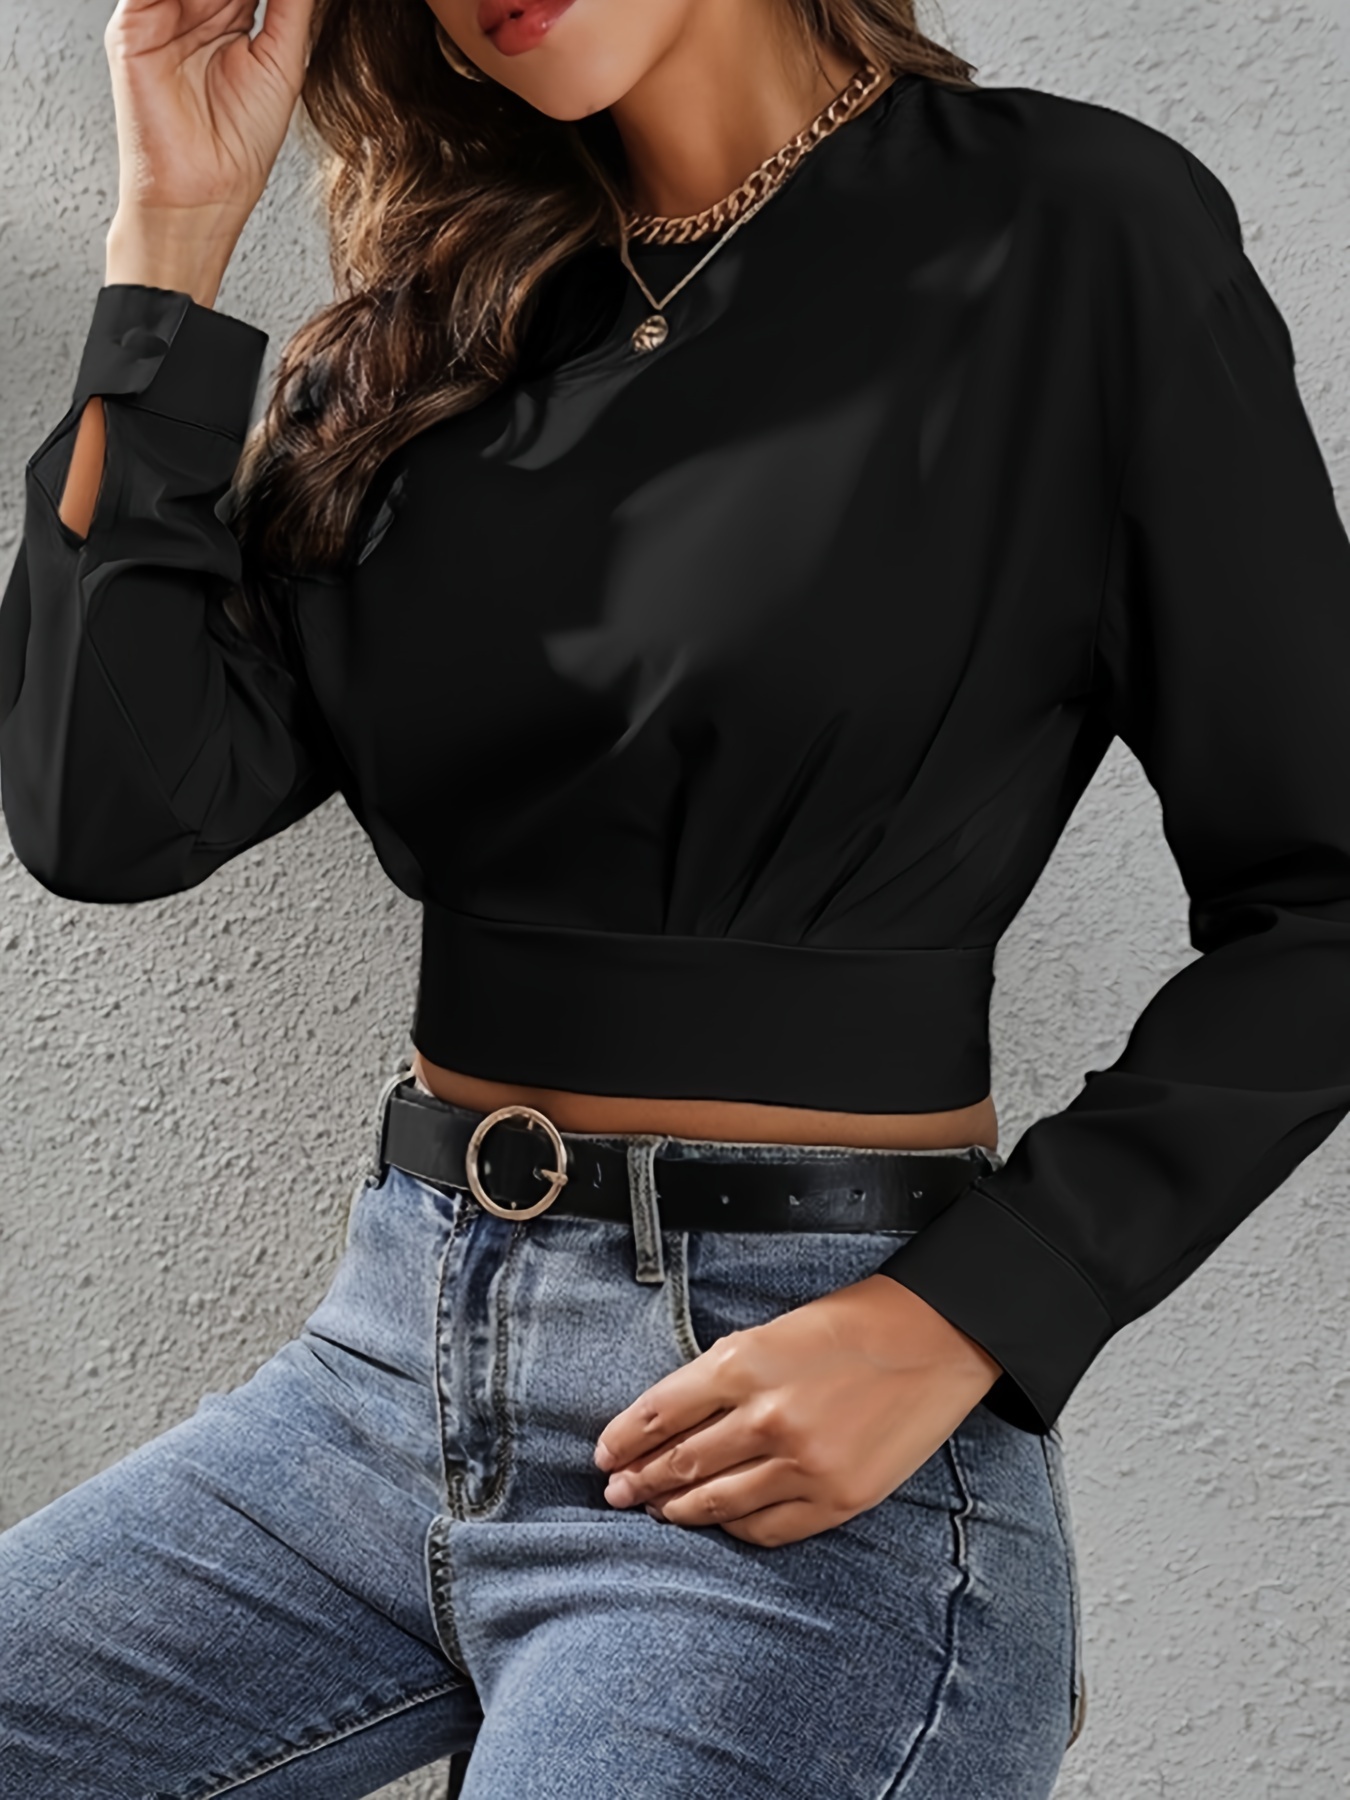 Square Neck Slim Crop Blouses, Sexy Long Sleeve Corset Tops, Women's  Clothing